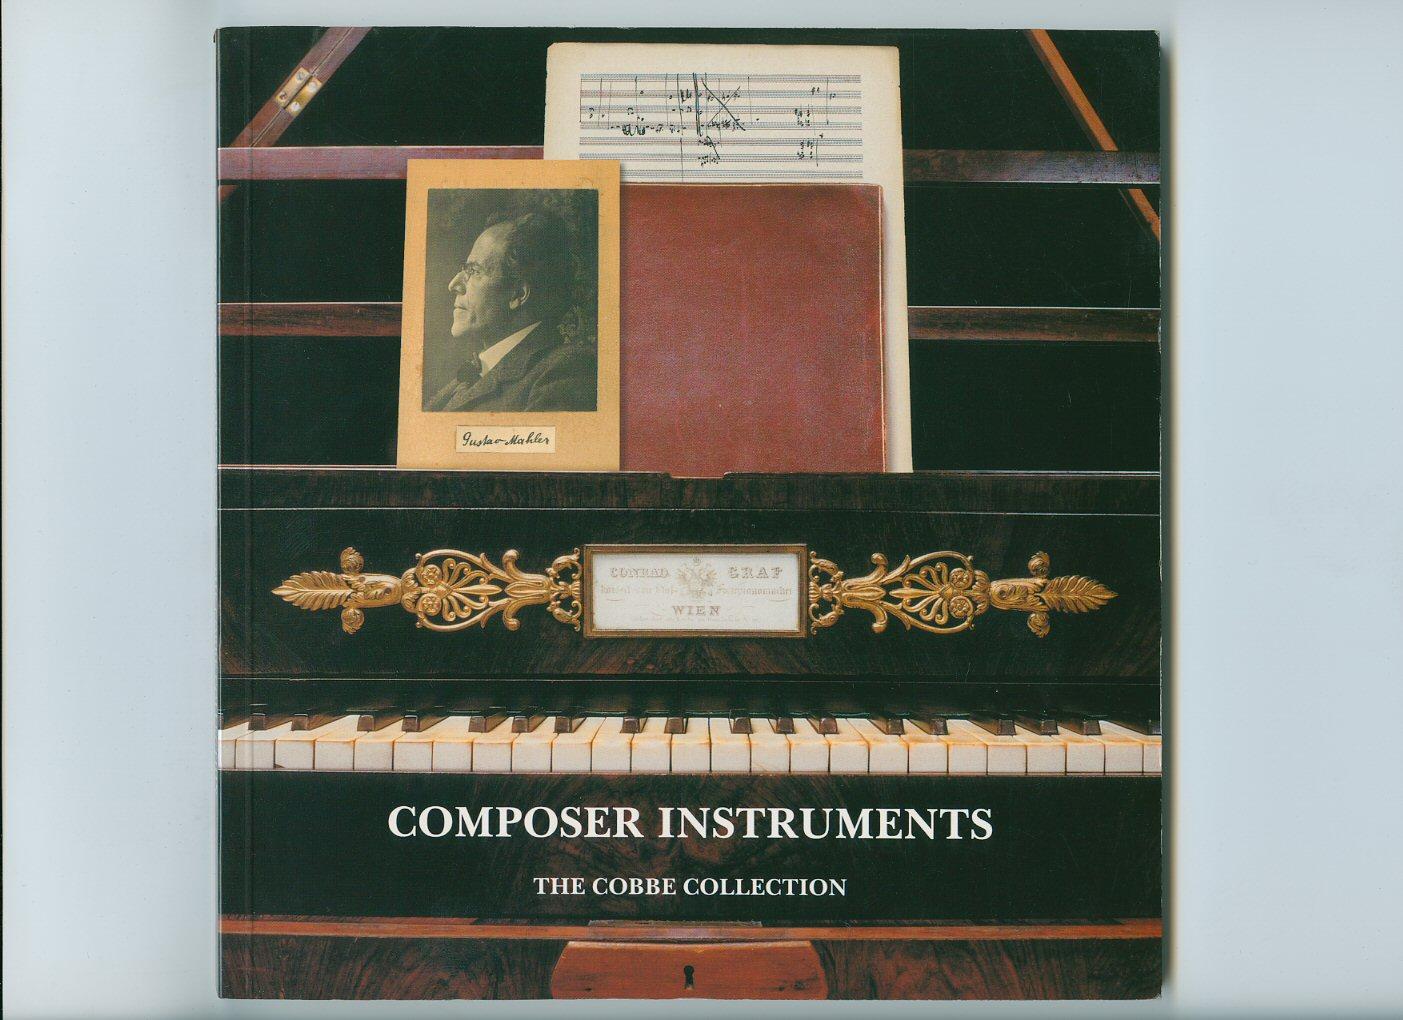 Composer Instruments; A Catalogue of the Cobbe Collection of Keyboard Instruments with Composer Associations - Cobbe, Alec [Technical Data Compiled by David Hunt]